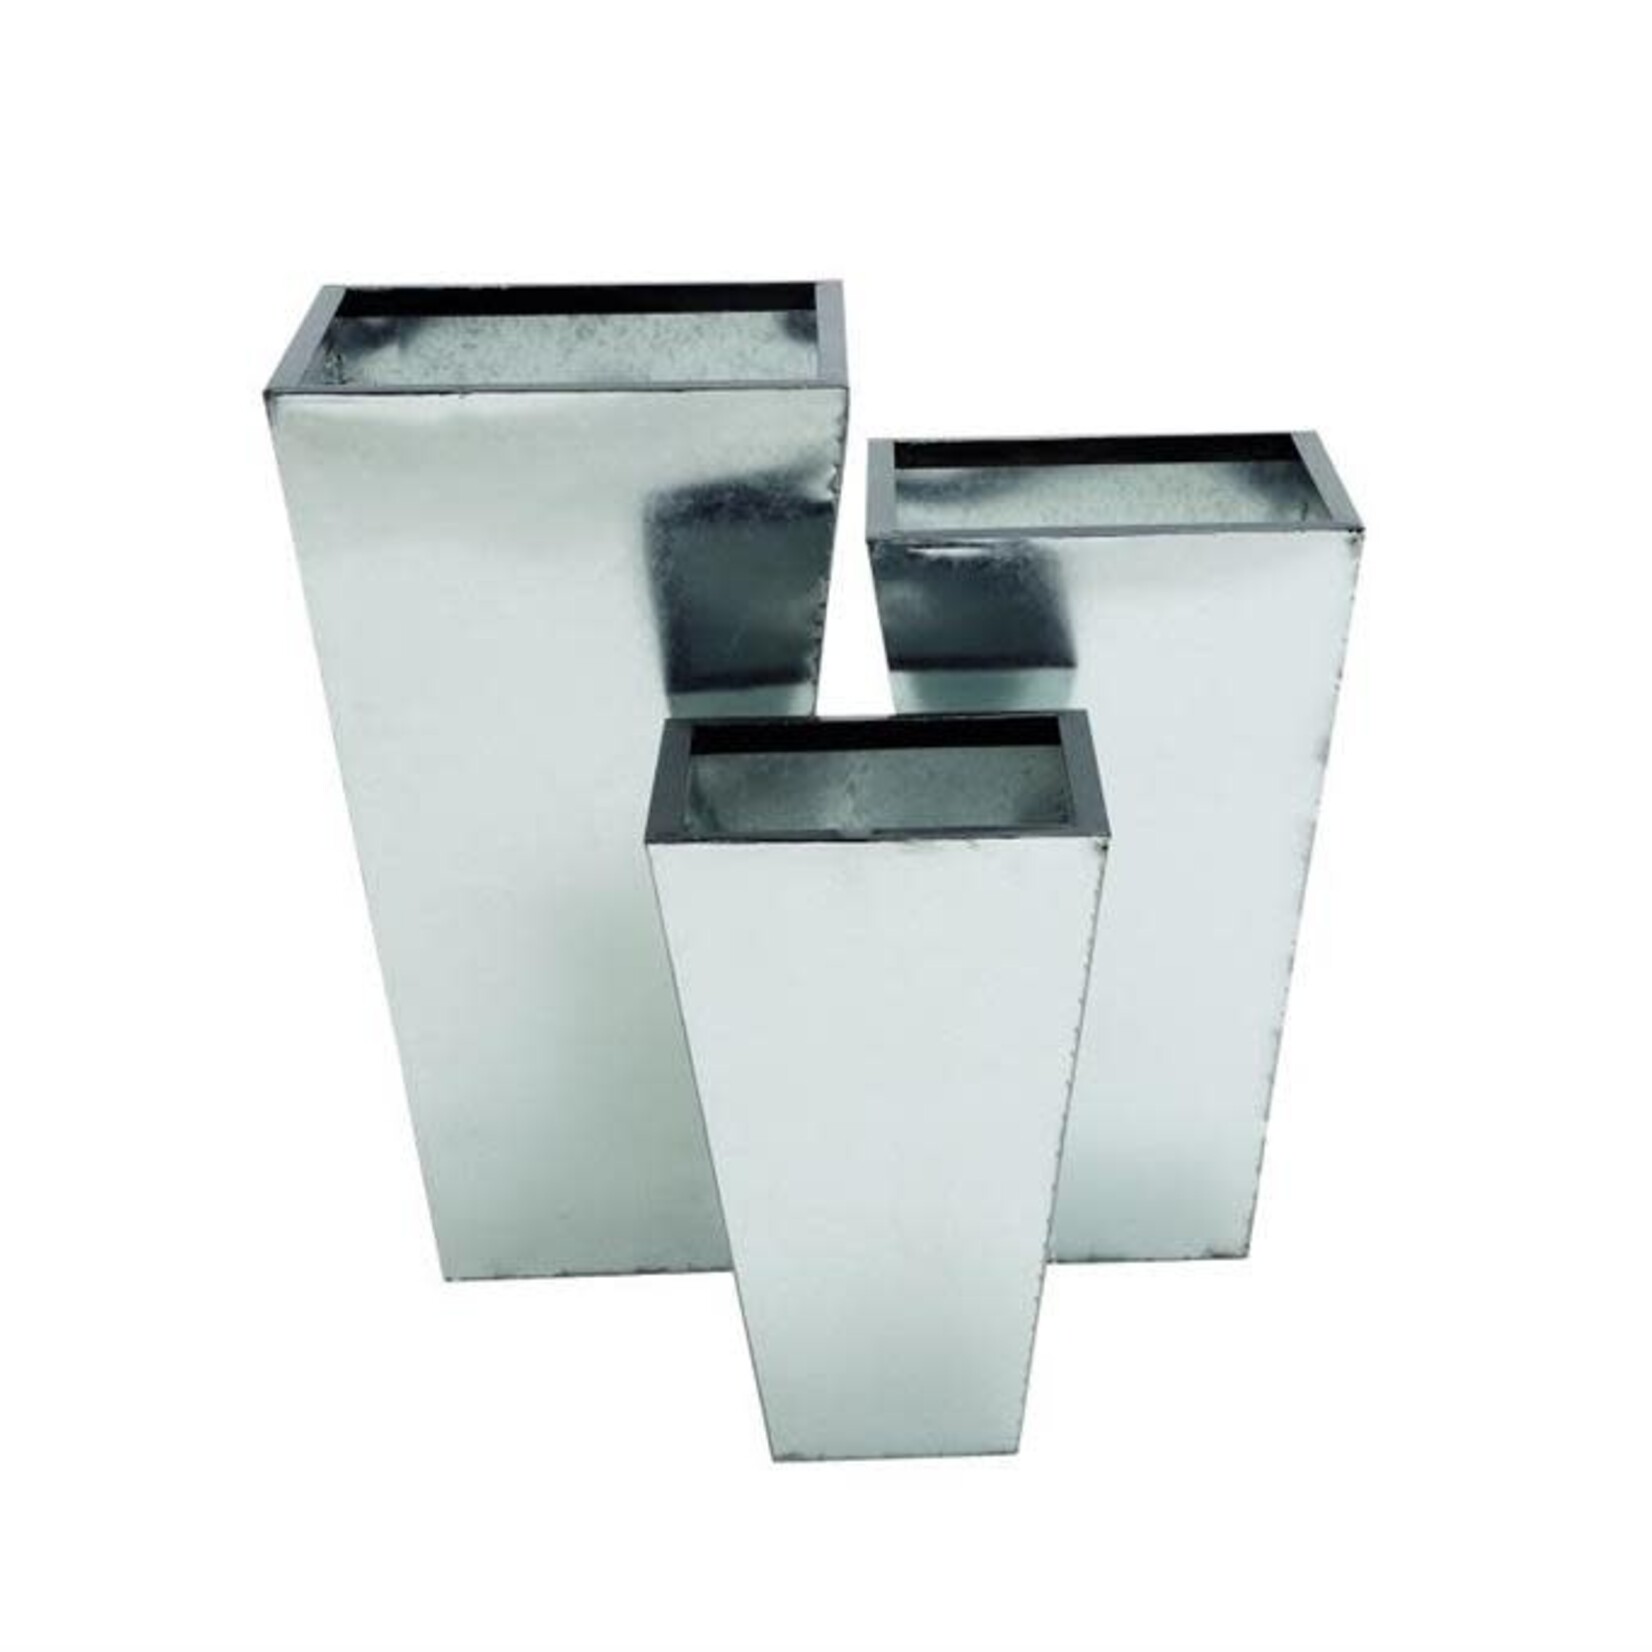 60% OFF WAS $85 NOW $34.00, 26”h x 15” SILVER METAL PLANT STAND